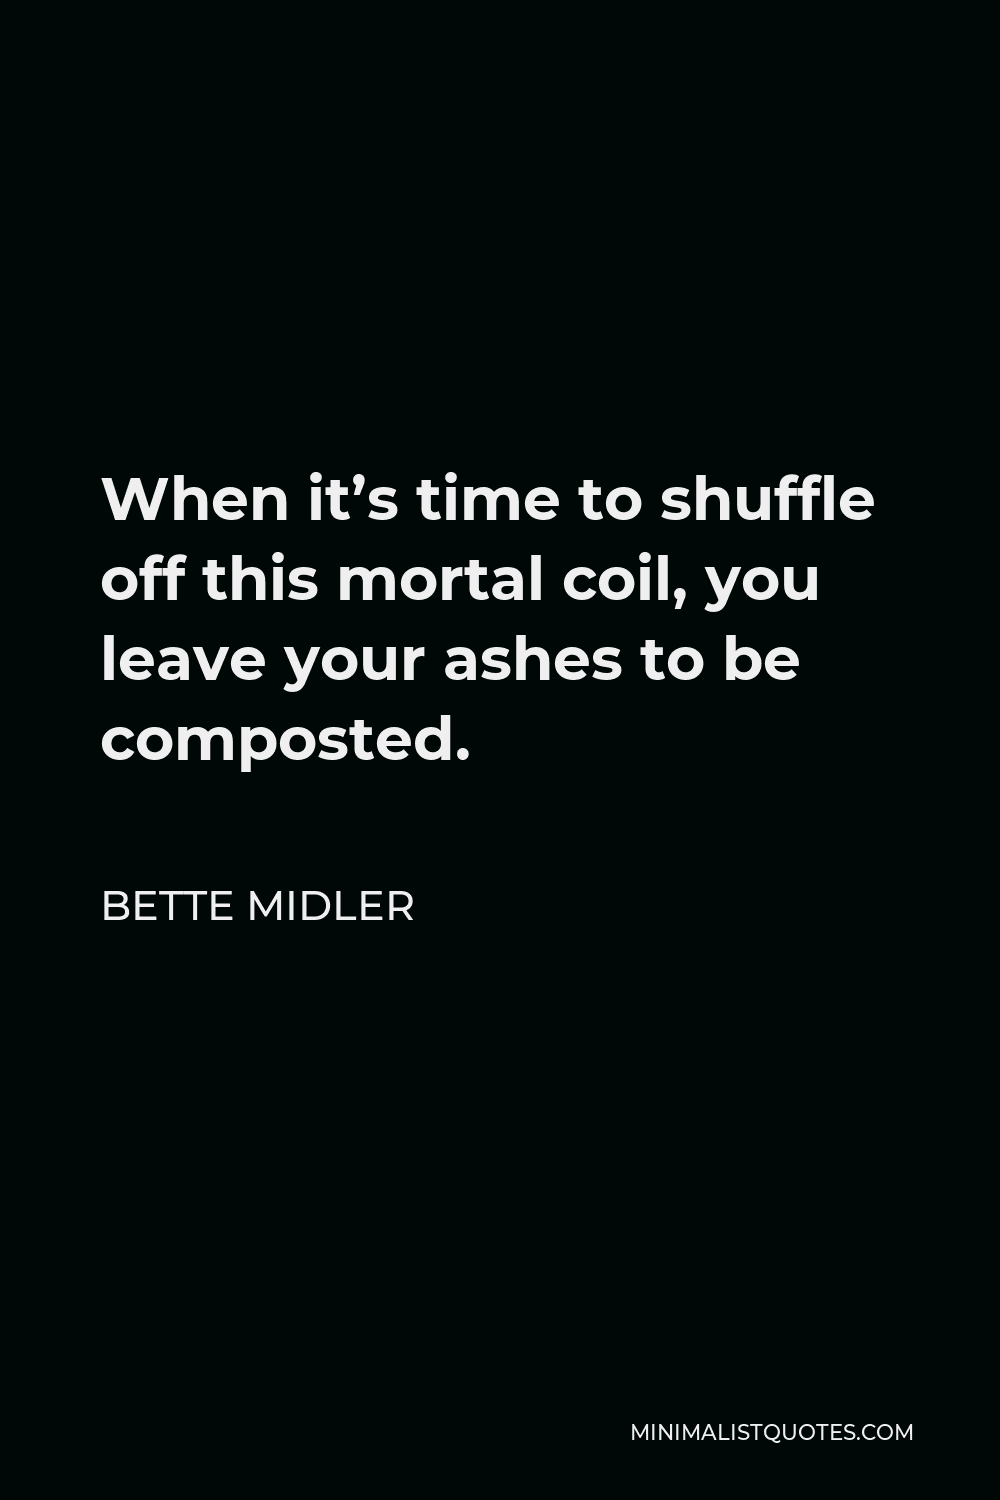 Bette Midler Quote - When it’s time to shuffle off this mortal coil, you leave your ashes to be composted.